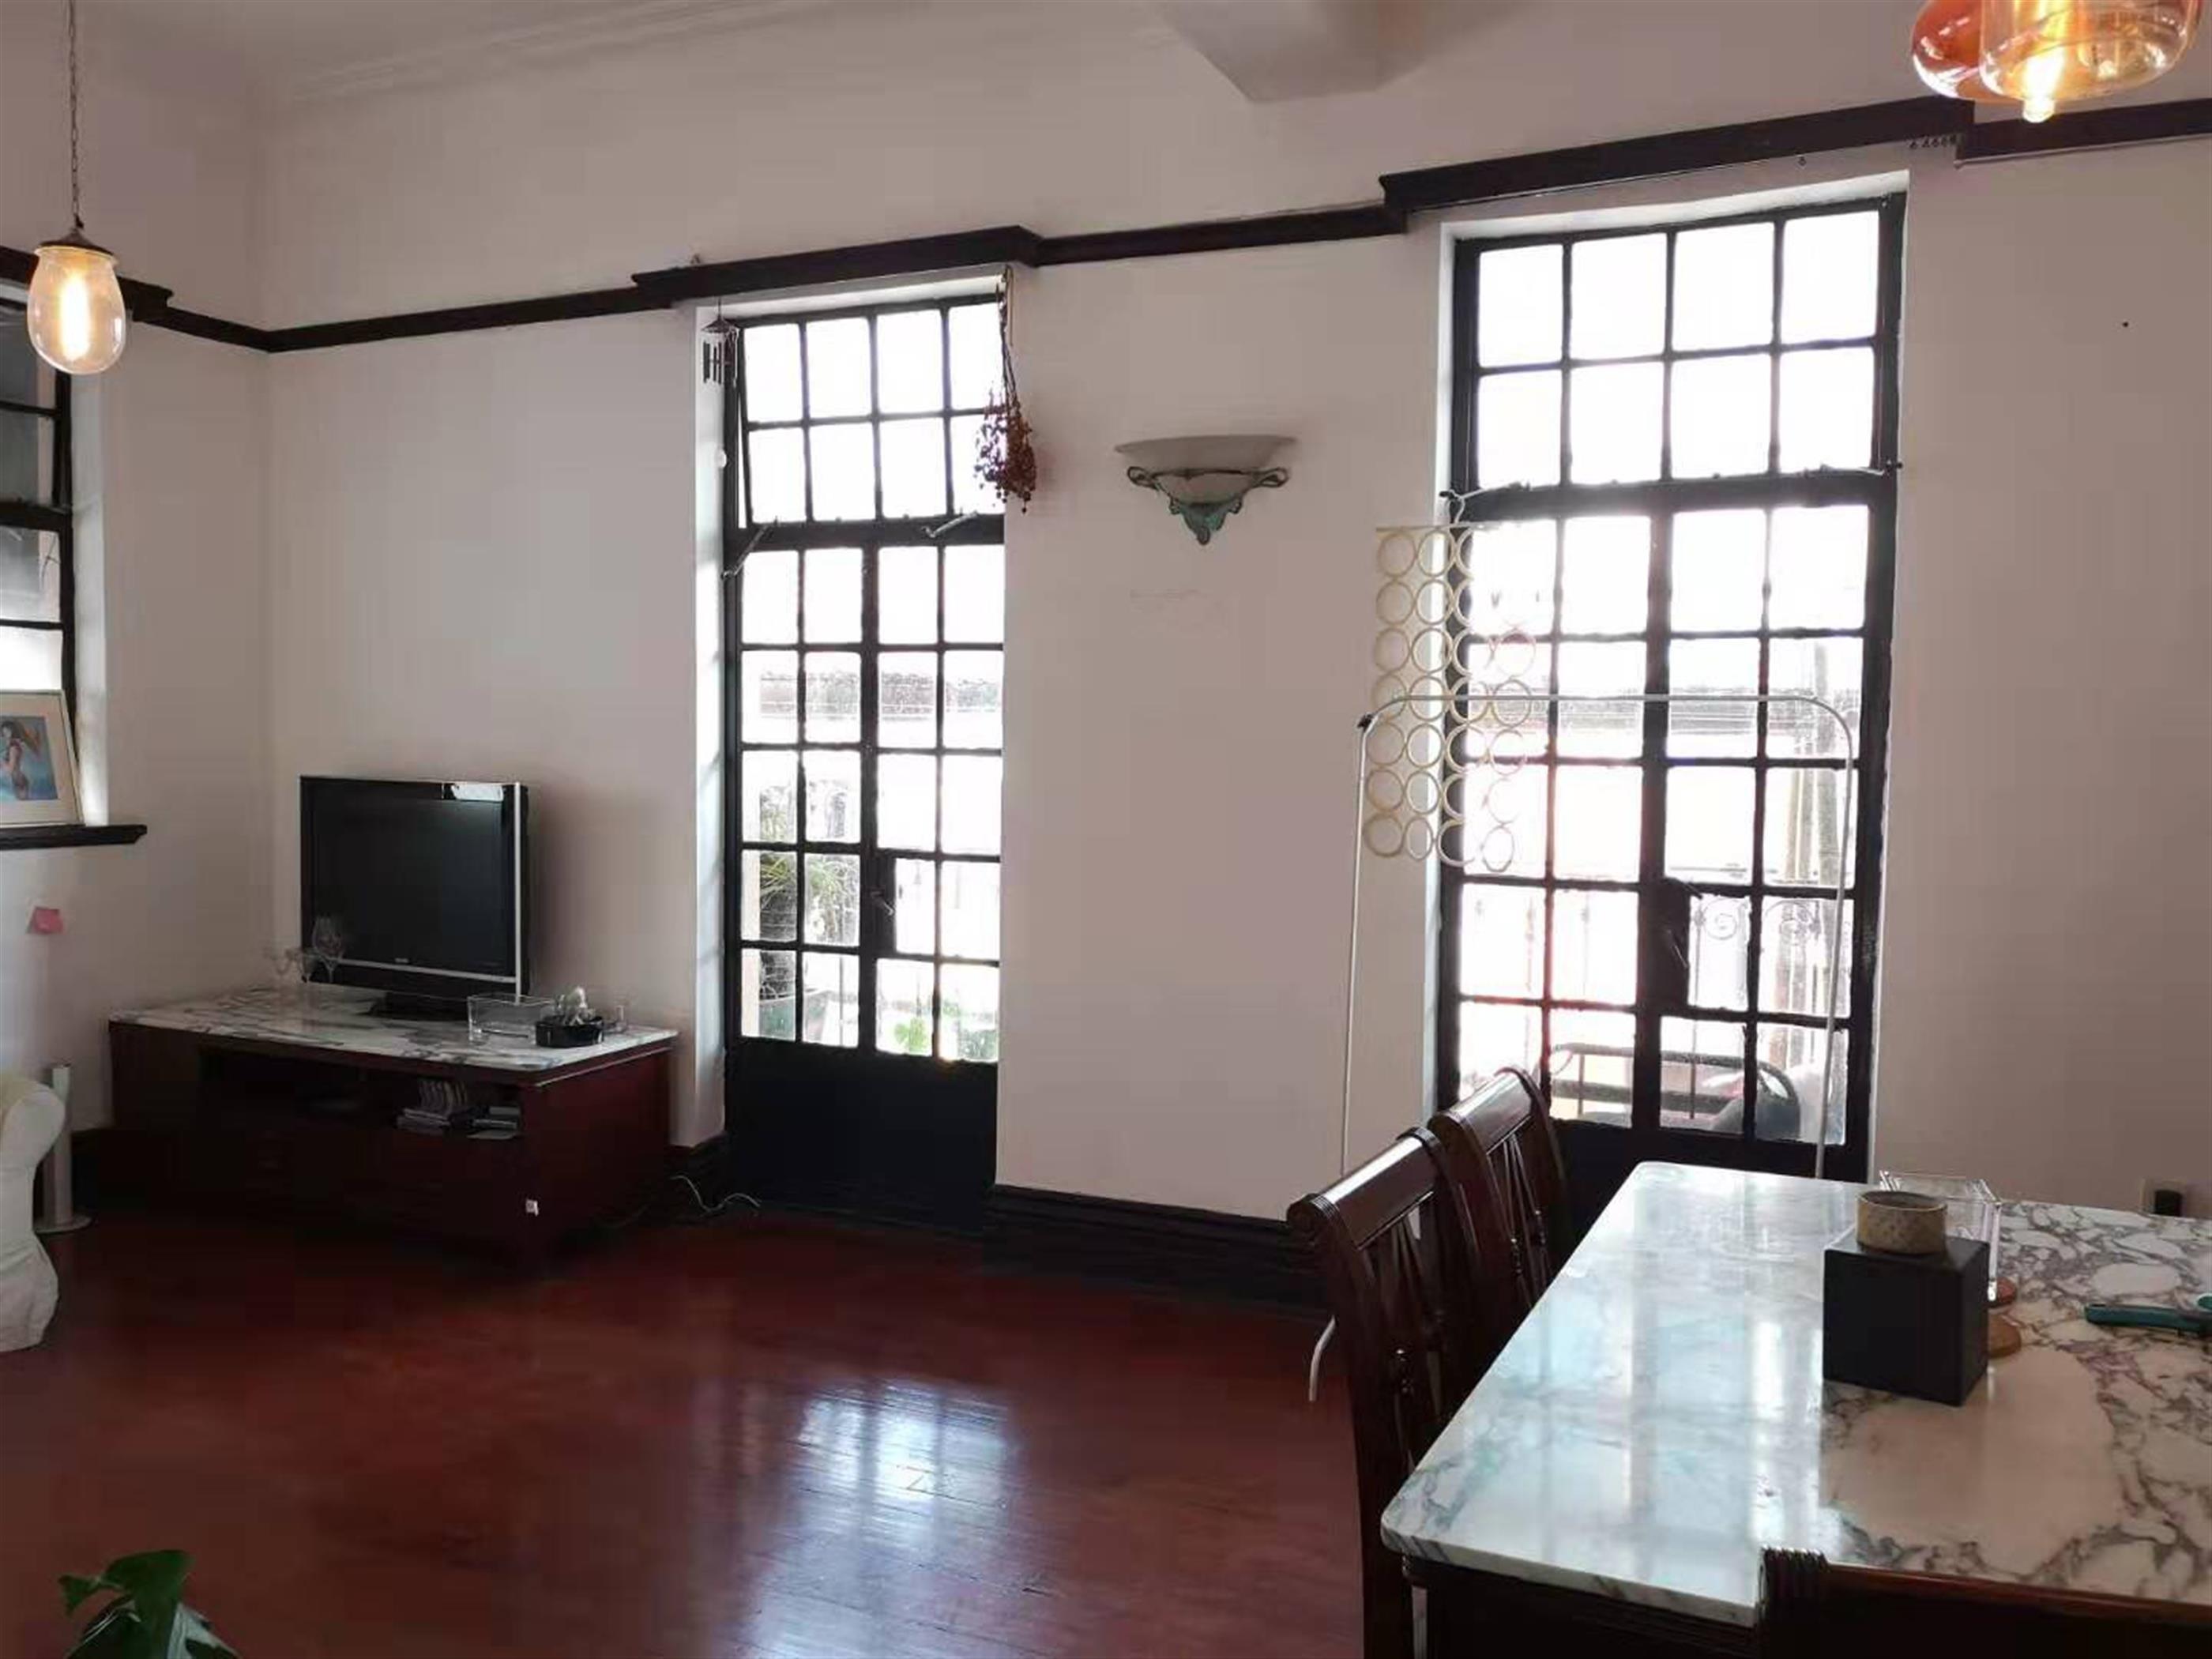 Open Living Room Great Value Great Location Bright 2BR Lane House Apt nr LN 2/12/13 for Rent in Shanghai